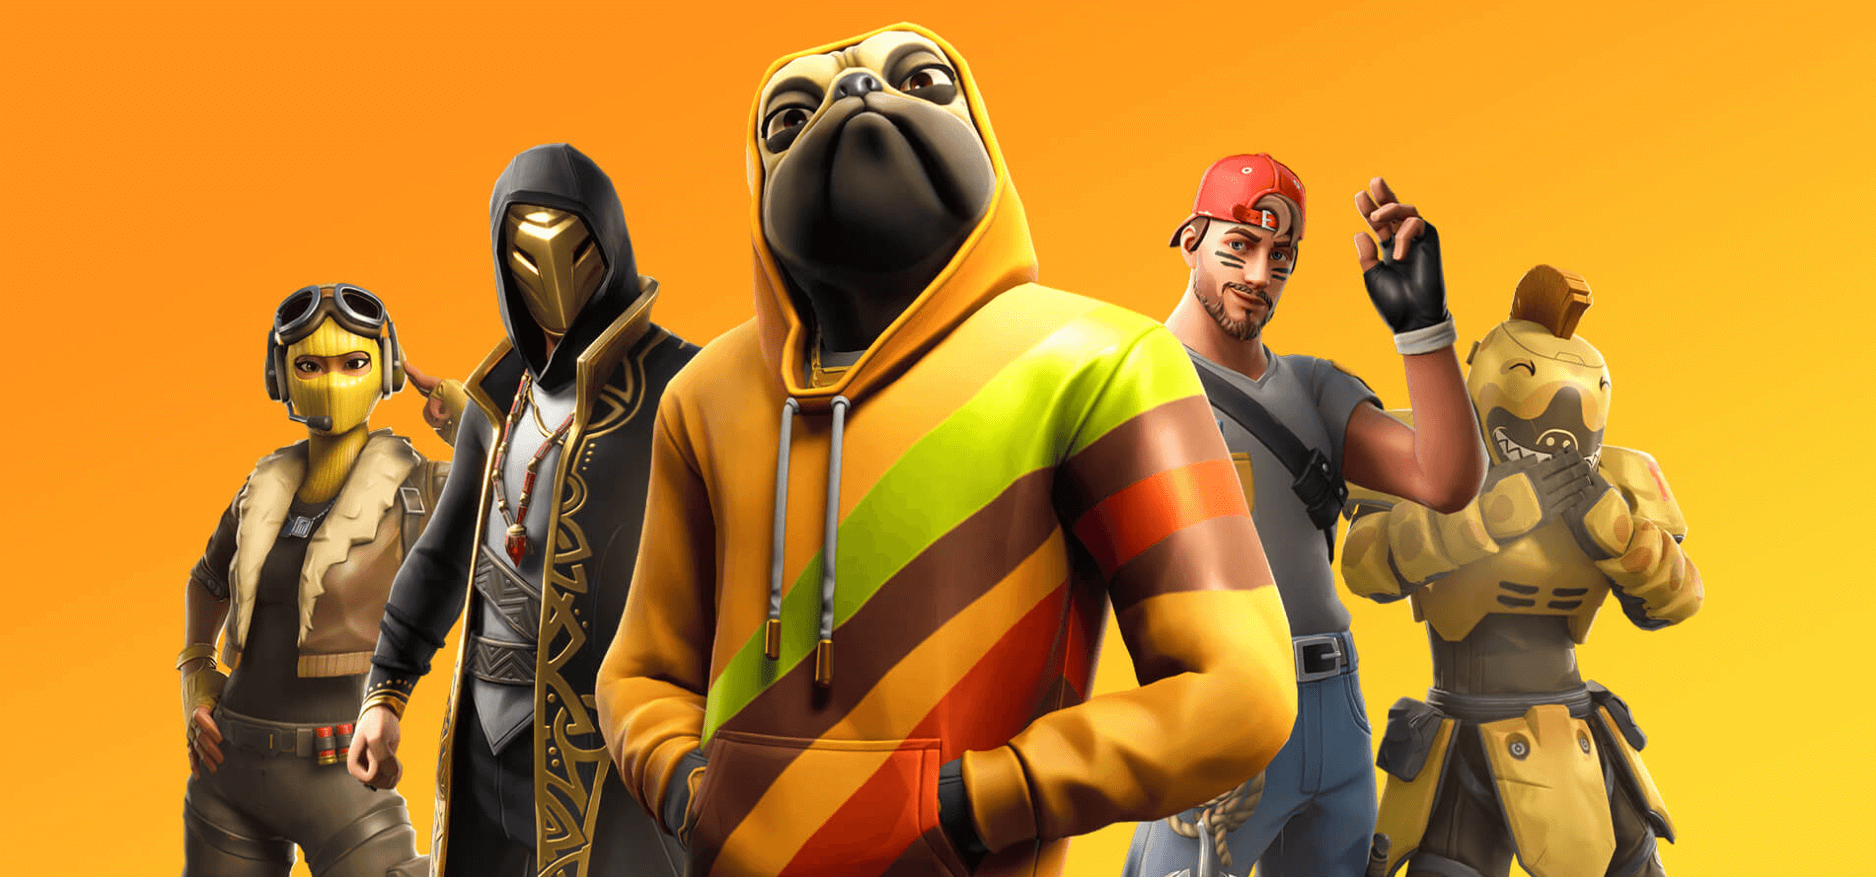 5 Fortnite Players To Watch Out For In